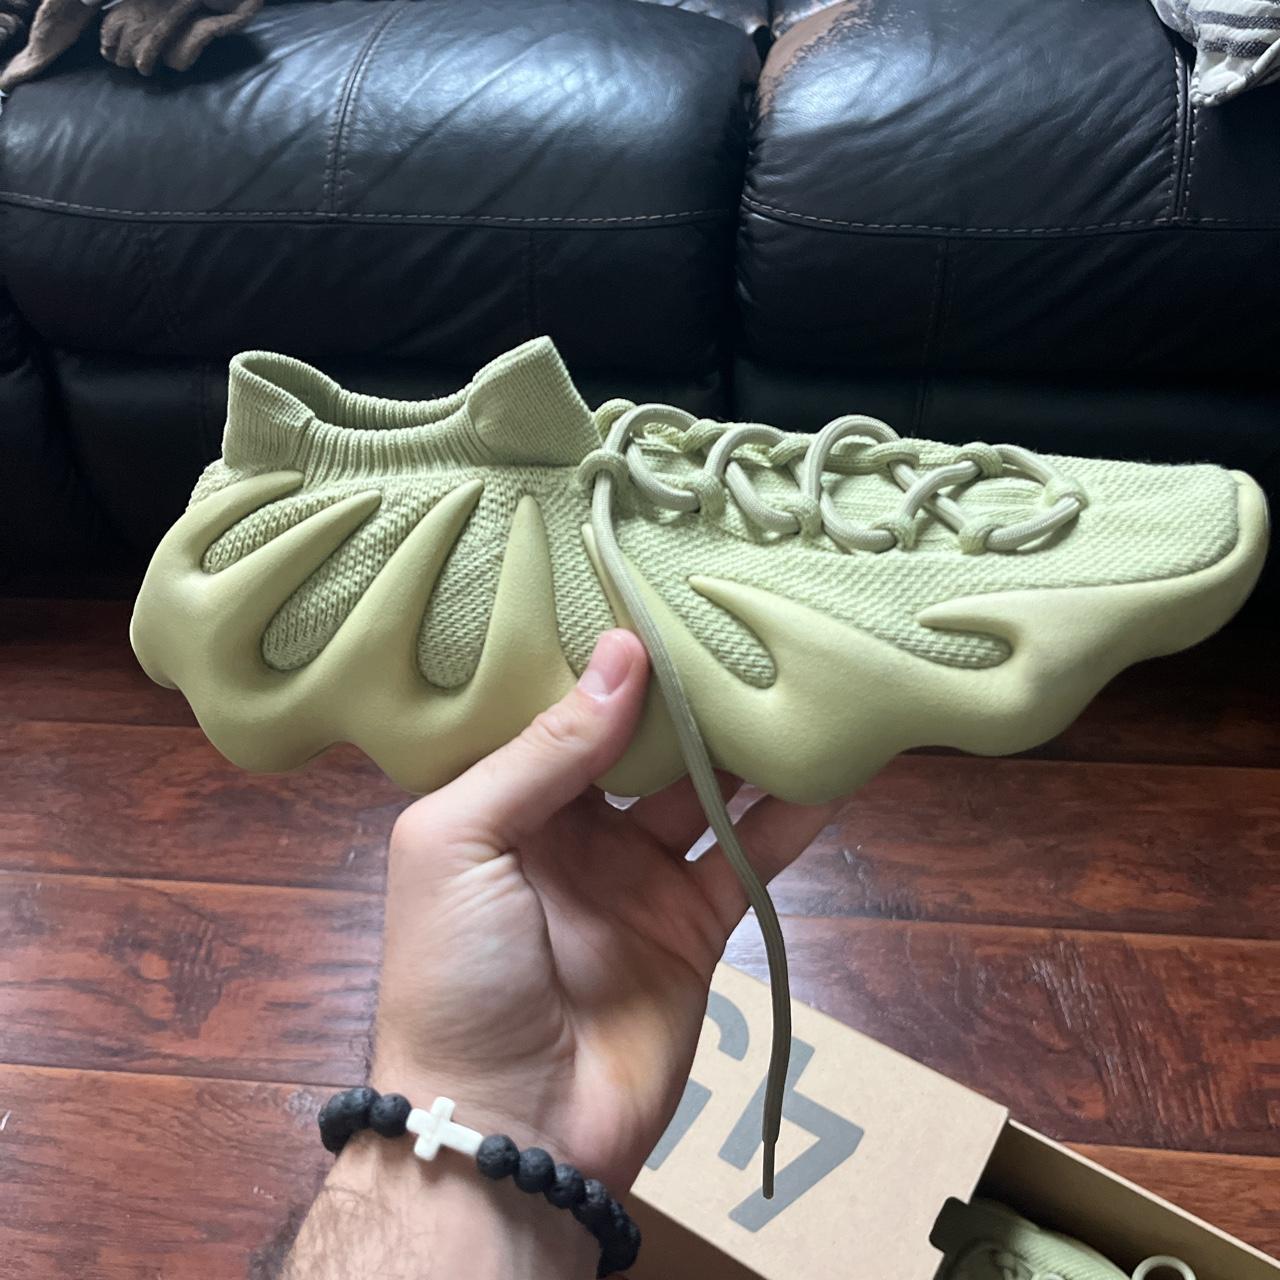 Used Yeezy 450 resins, still in great condition and... - Depop